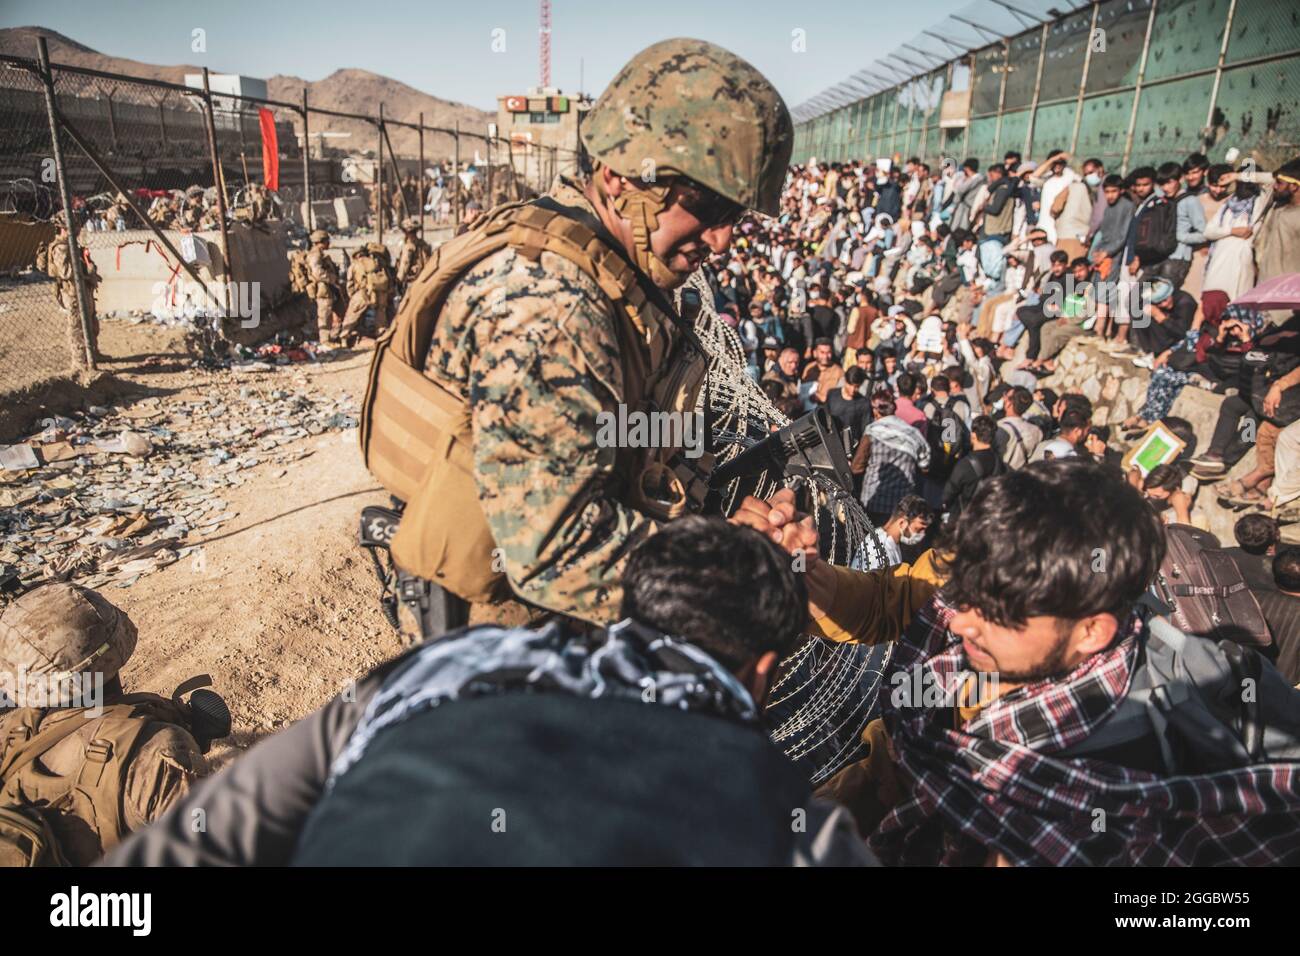 Kabul, Afghanistan. 26th Aug, 2021. A U.S. Marine with the Special Purpose Marine Air-Ground Task Force Crisis Response team, assist Afghan refugees at the Evacuation Control Center at Hamid Karzai International Airport during Operation Allies Refuge August 26, 2021 in Kabul, Afghanistan. Credit: Planetpix/Alamy Live News Stock Photo